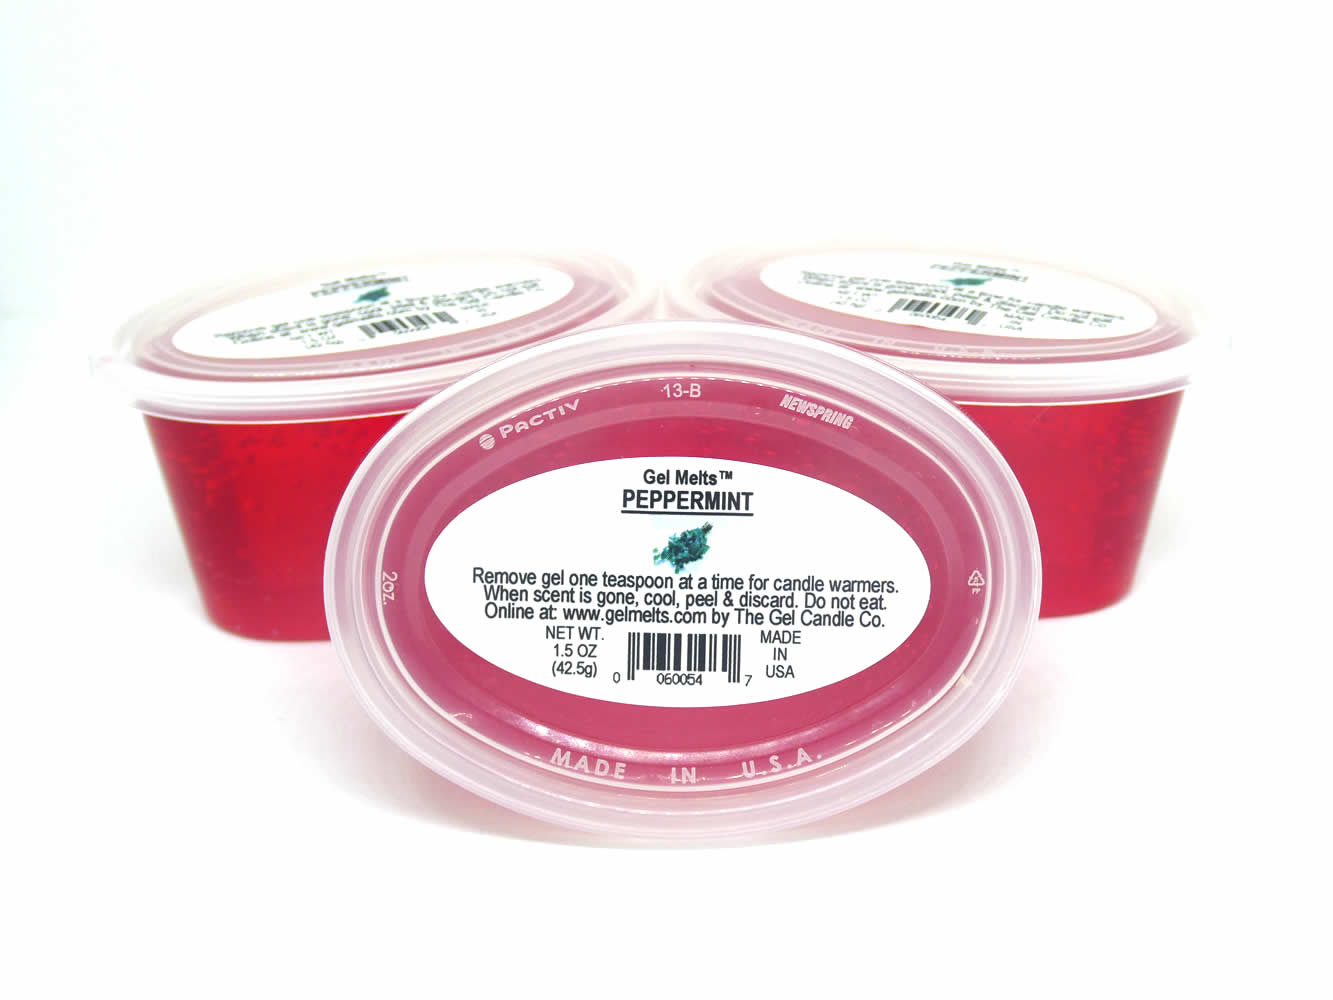 Peppermint scented Gel Melts™ Gel Wax for warmers - 3 pack